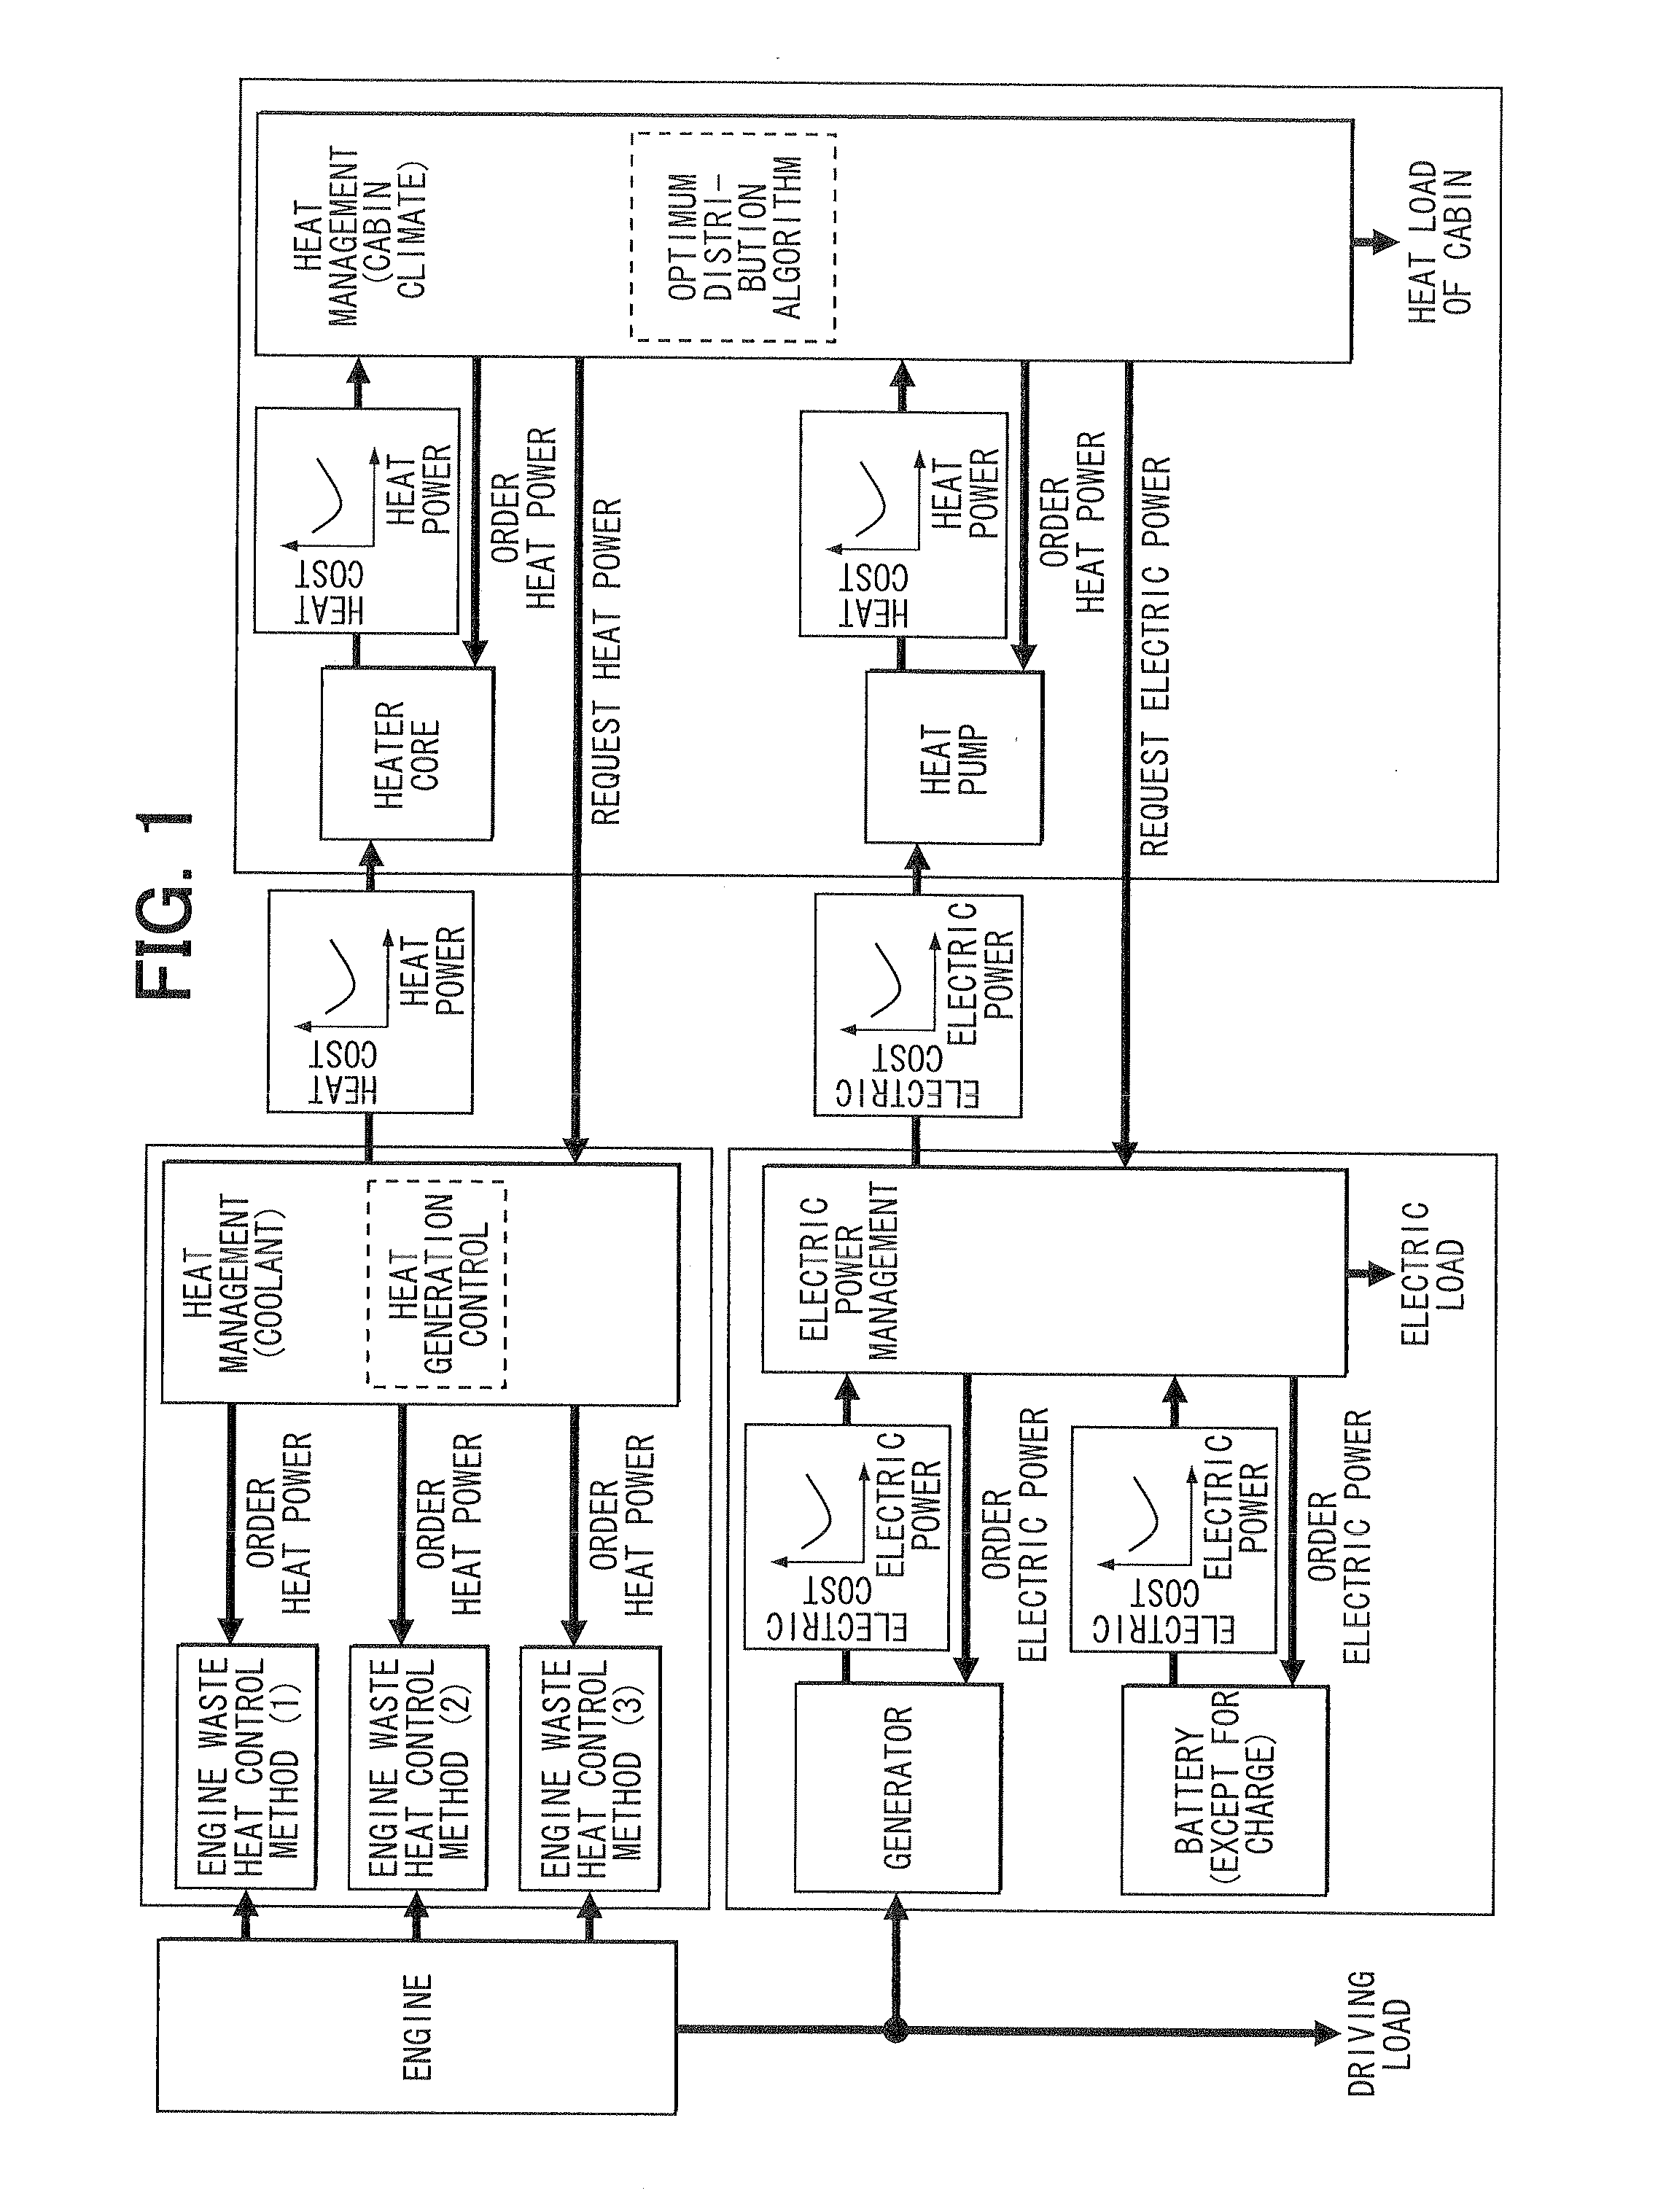 Vehicle heat source control device and method for controlling vehicle heat source